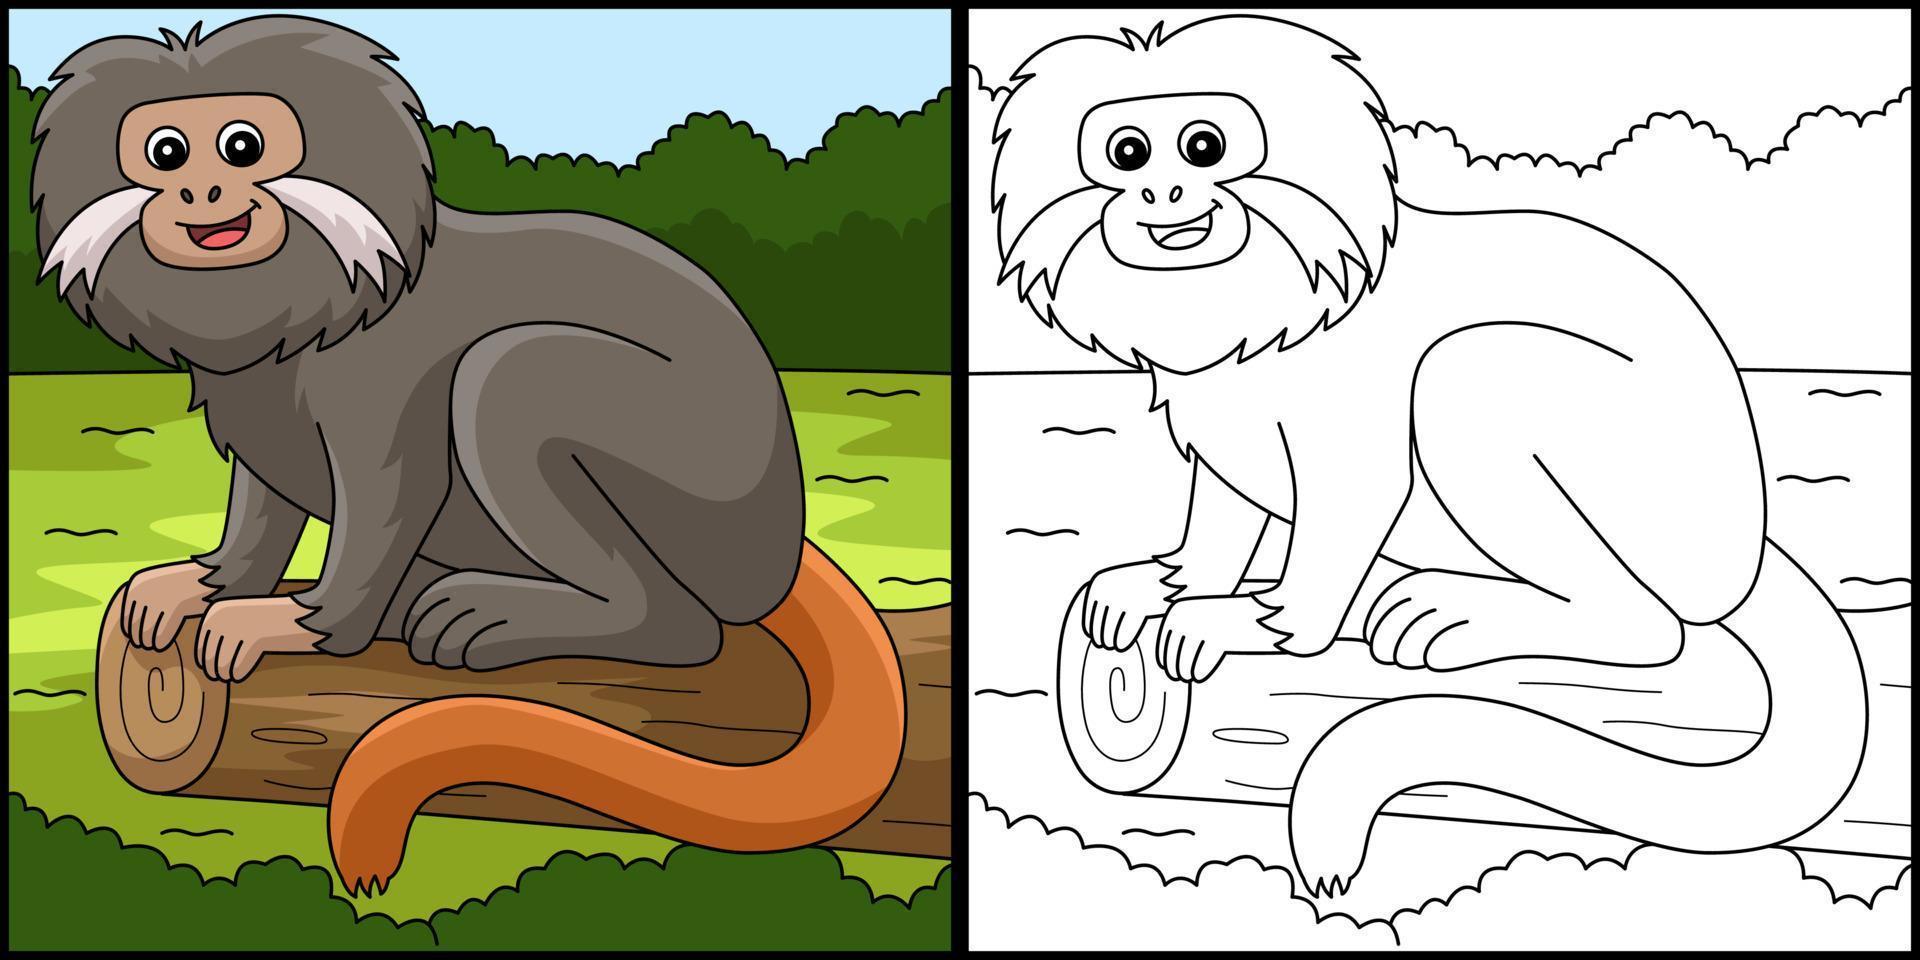 Tamarin Animal Coloring Page Colored Illustration vector